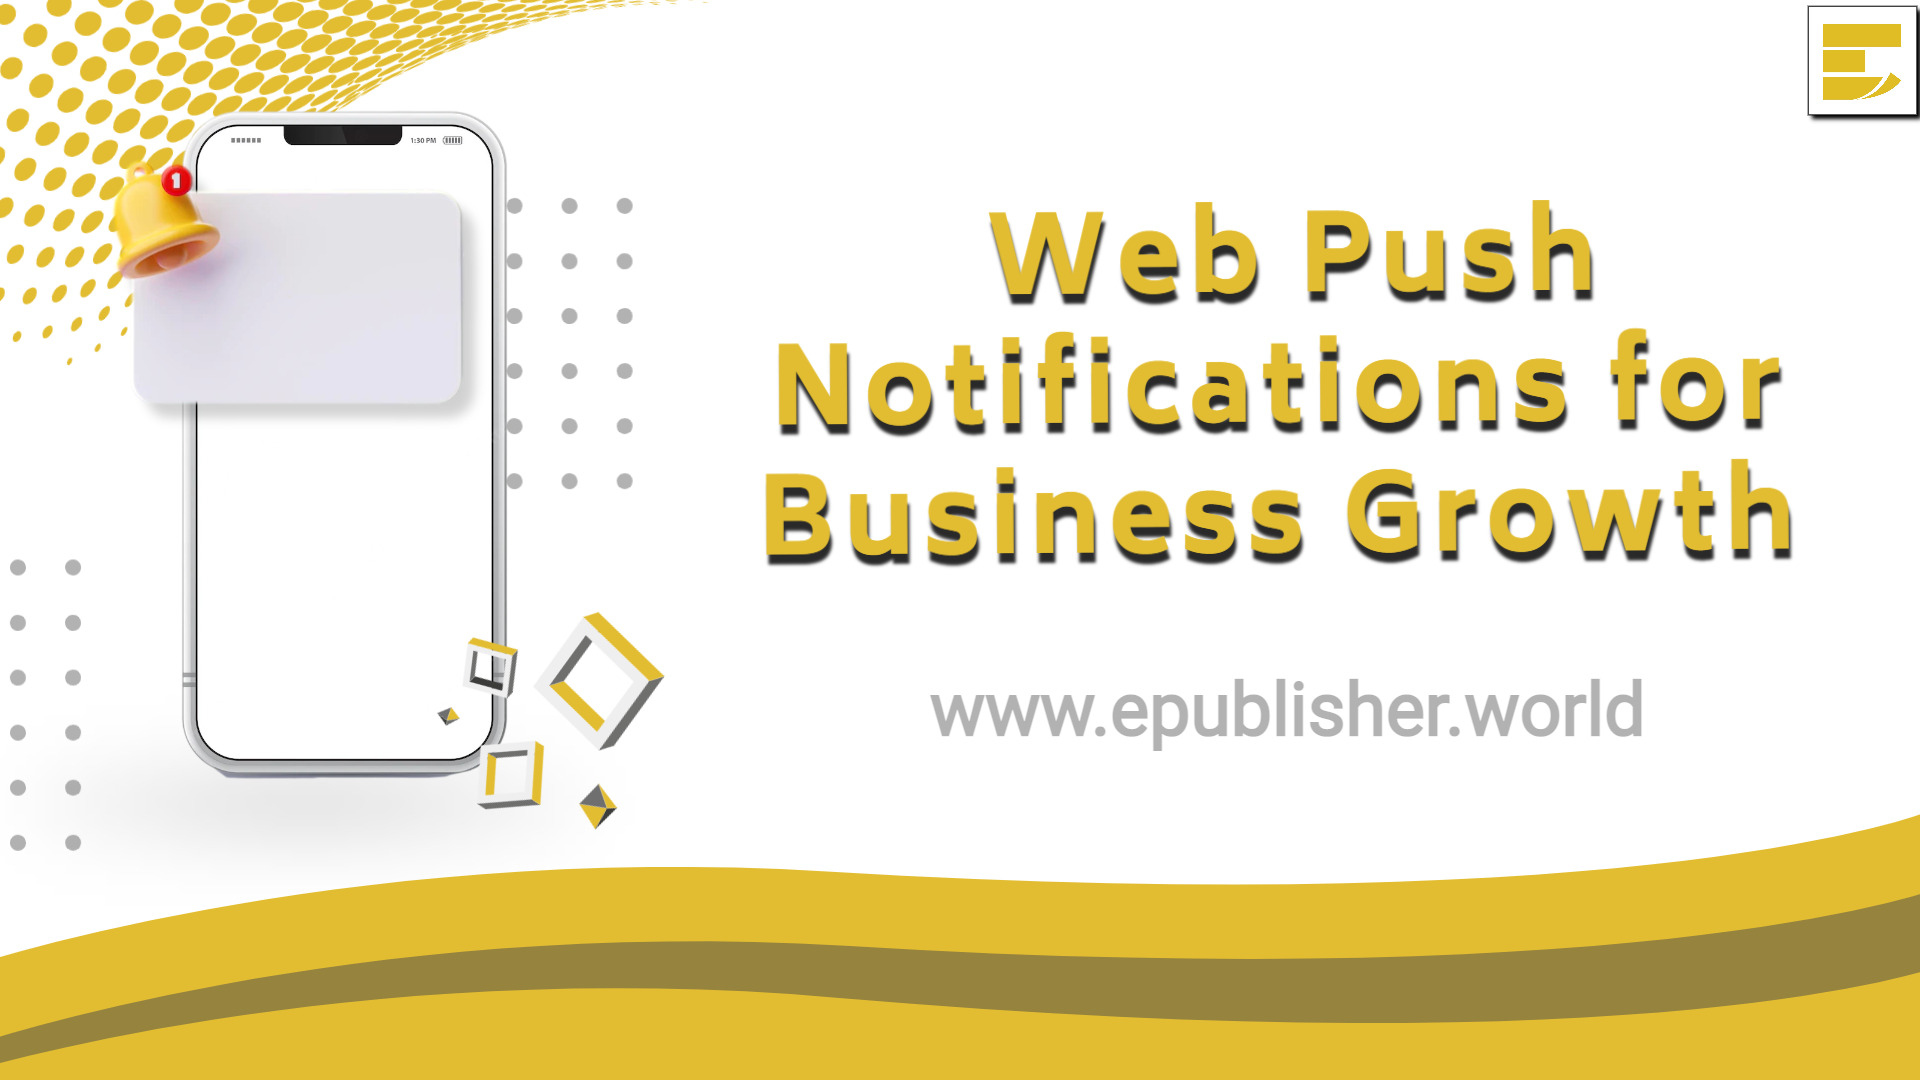 Web Push Notifications for Business Growth